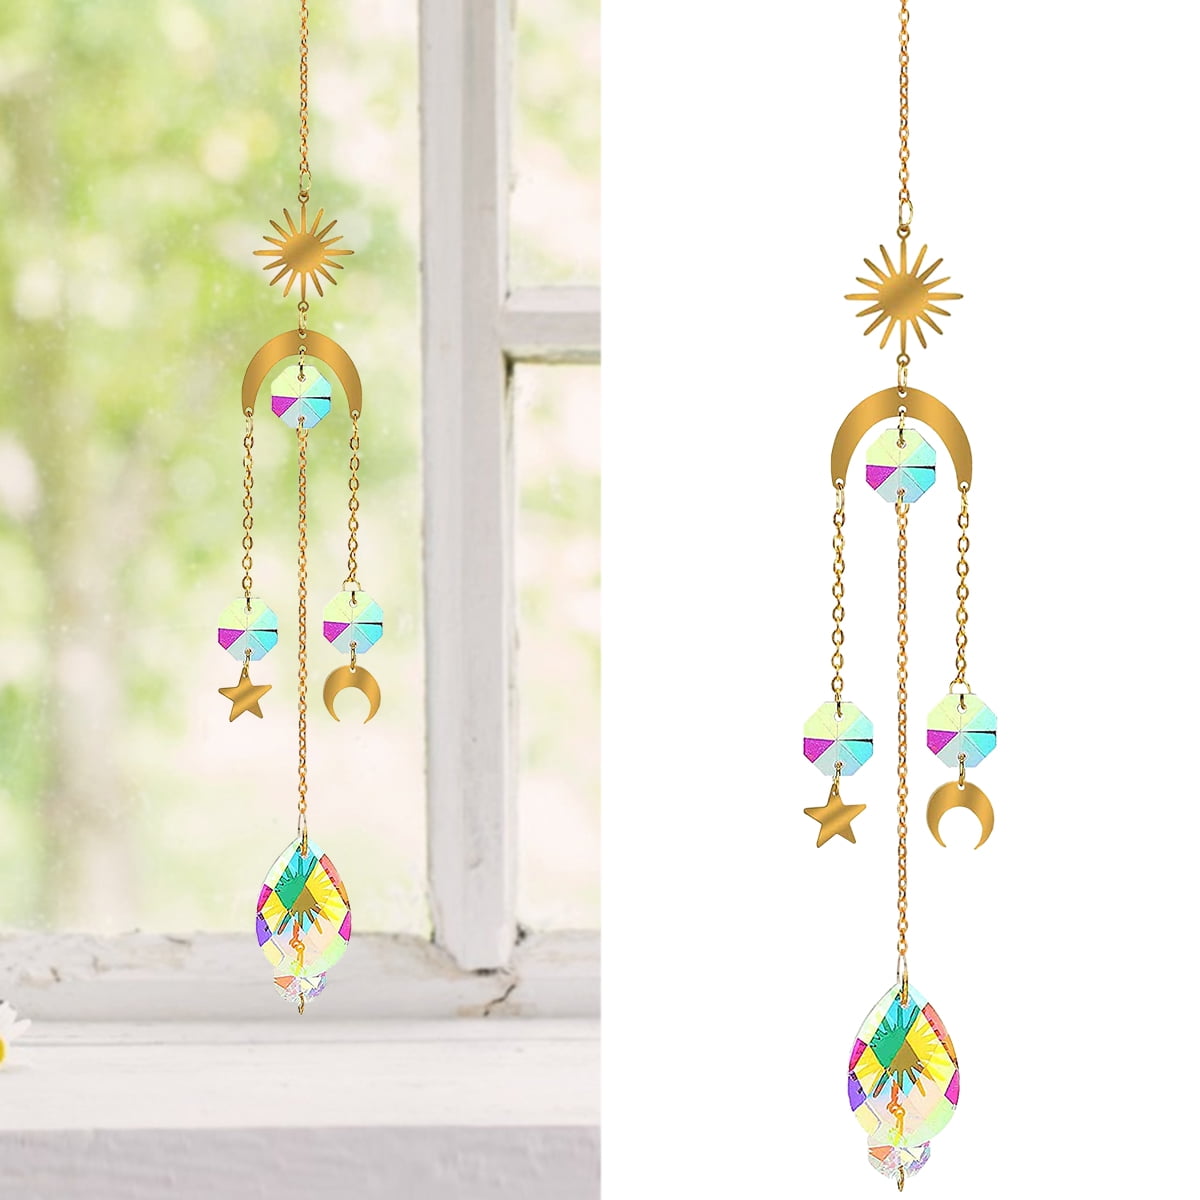 Hanging Crystals Sun Catchers Indoor Window Rainbow Maker Colorful Crystal Decor for Home,Office,Garden Decoration 4 Pcs Crystals Suncatcher 